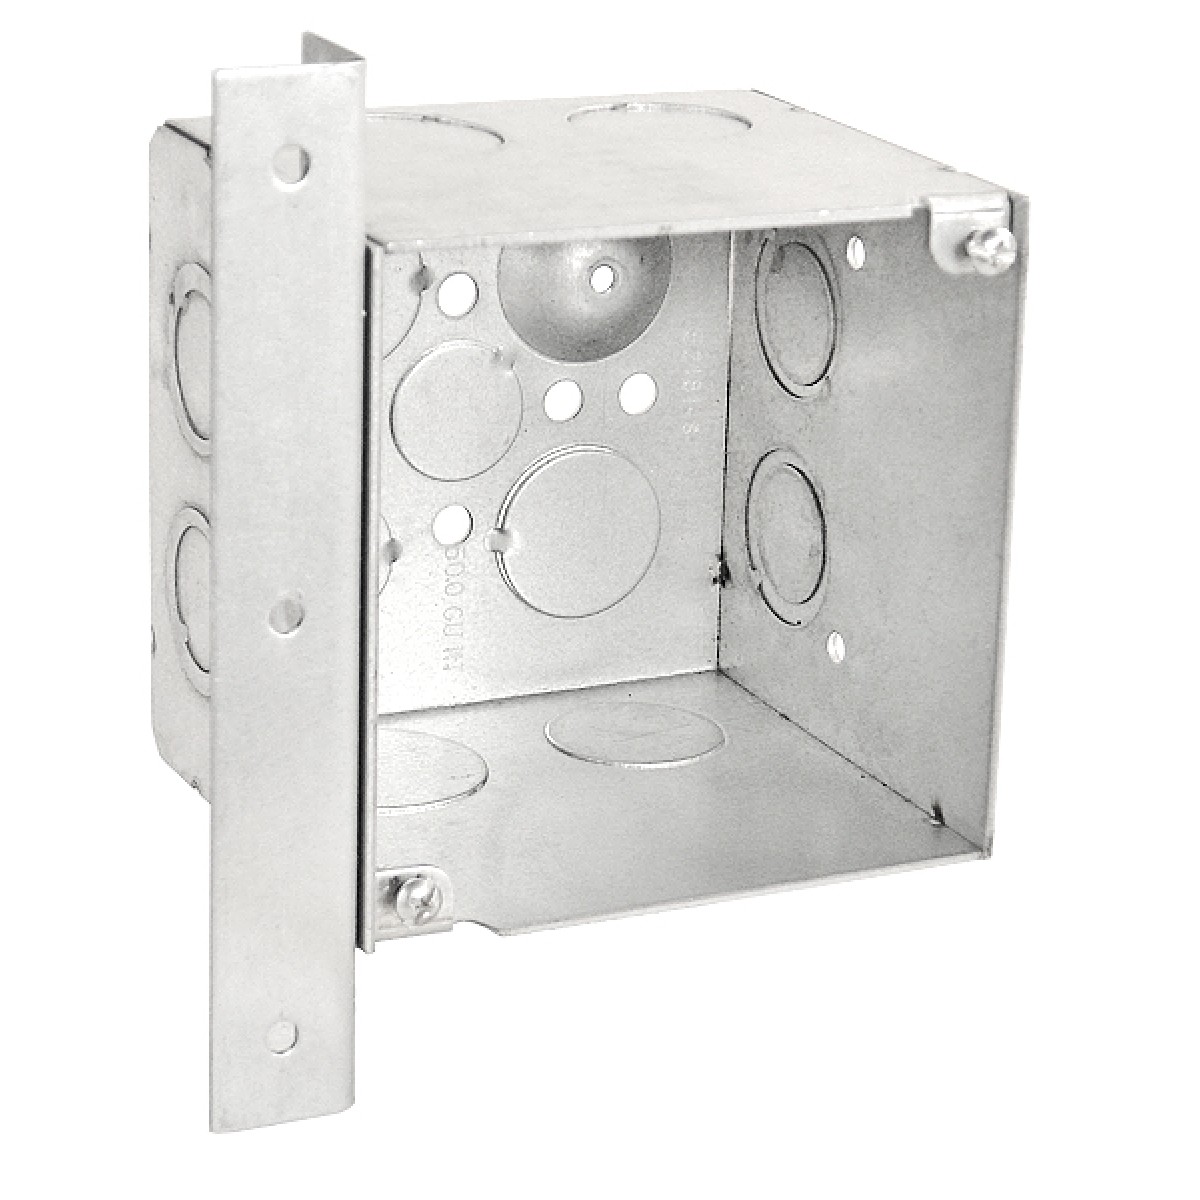 1 Pc, 4" Square, 3-1/2 In. Extra Deep Junction Box, Vertical Right Angle Bracket, Knockouts: Side: (4) 1/2-3/4 In (2) 3/4 In. & (2) 1 In.; Bottom (2) 1/2 In. & (2) 3/4 In, Zinc Plated Steel - image 1 of 1